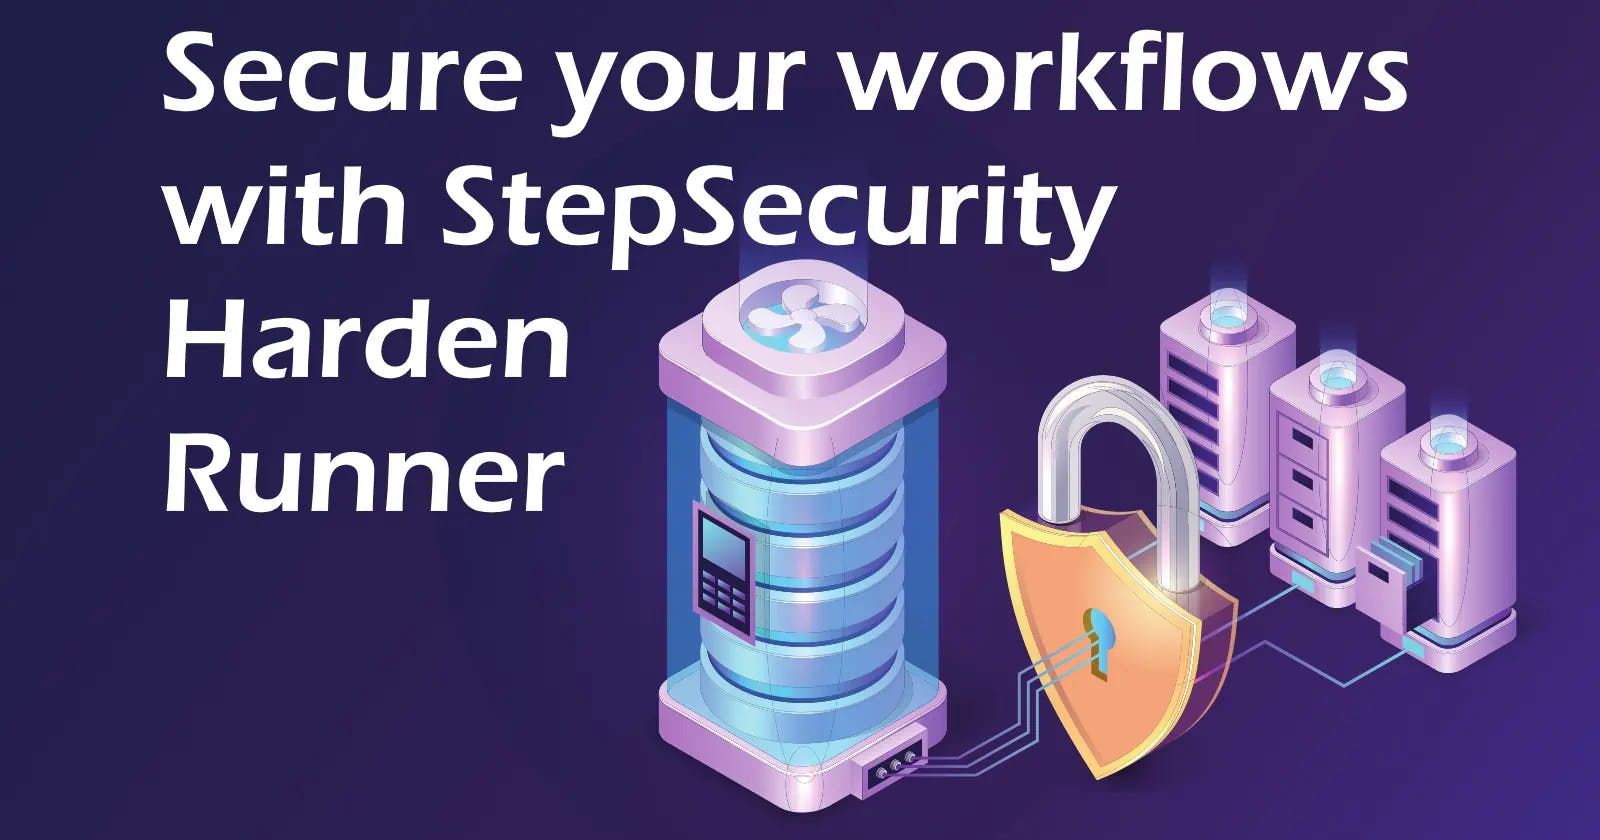 Secure your workflows with StepSecurity Harden Runner